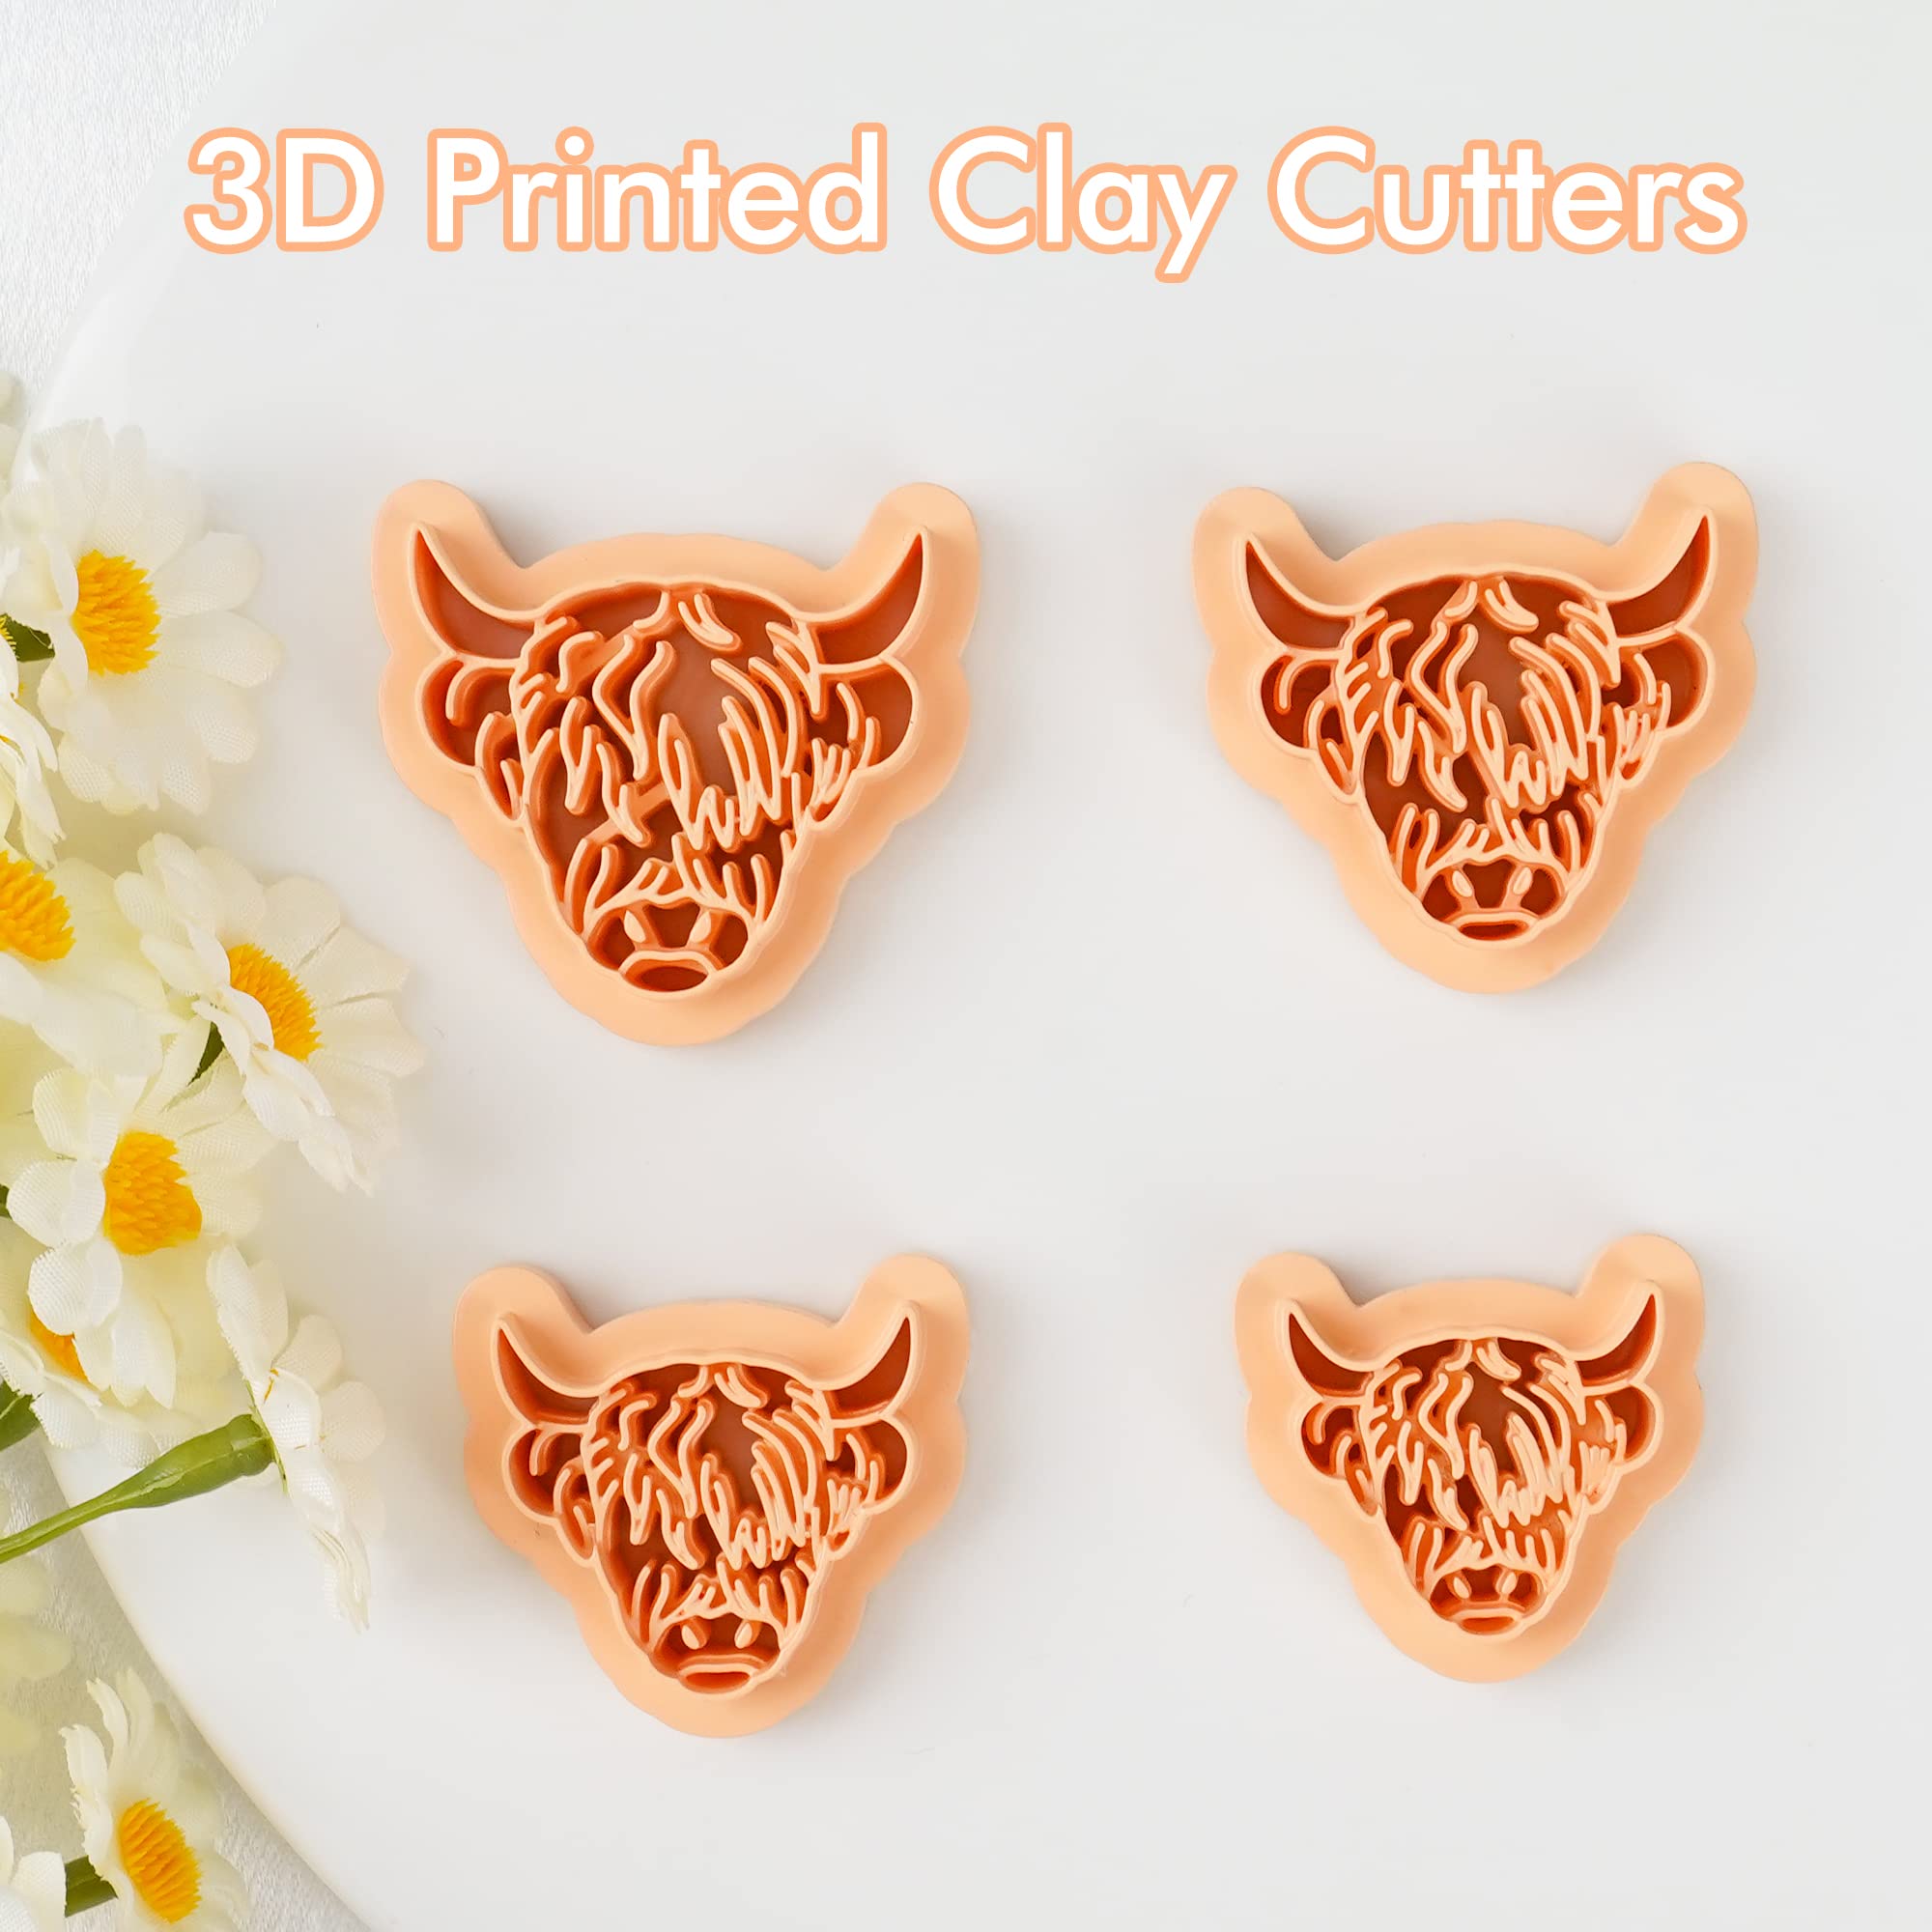 Puocaon Scotland Highland Cow Clay Cutters 4 Pcs